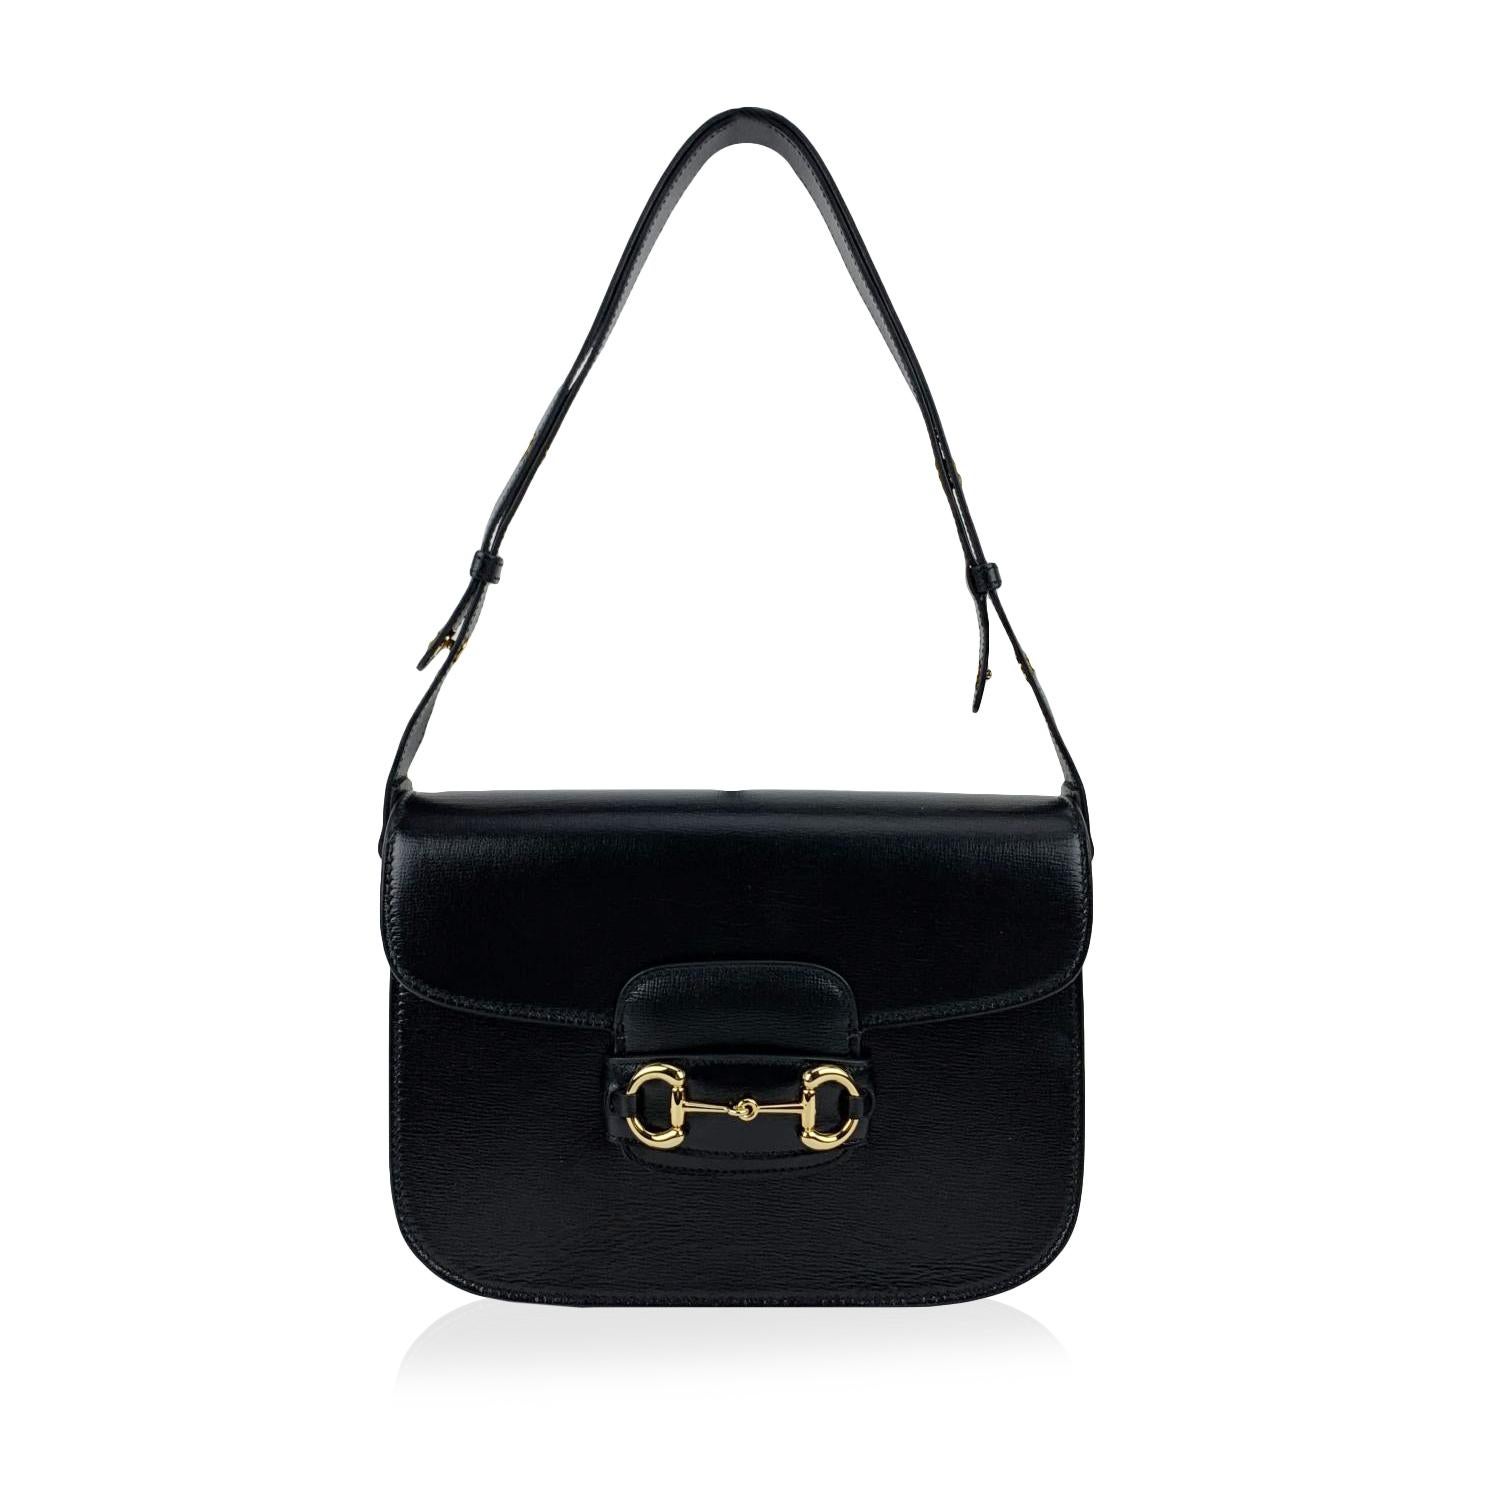 This beautiful Bag will come with a Certificate of Authenticity provided by Entrupy. The certificate will be provided at no further cost.

Beautiful Gucci '1955 Horsebit' shoulder bag, crafted in black leather. Structured shape. This model is a